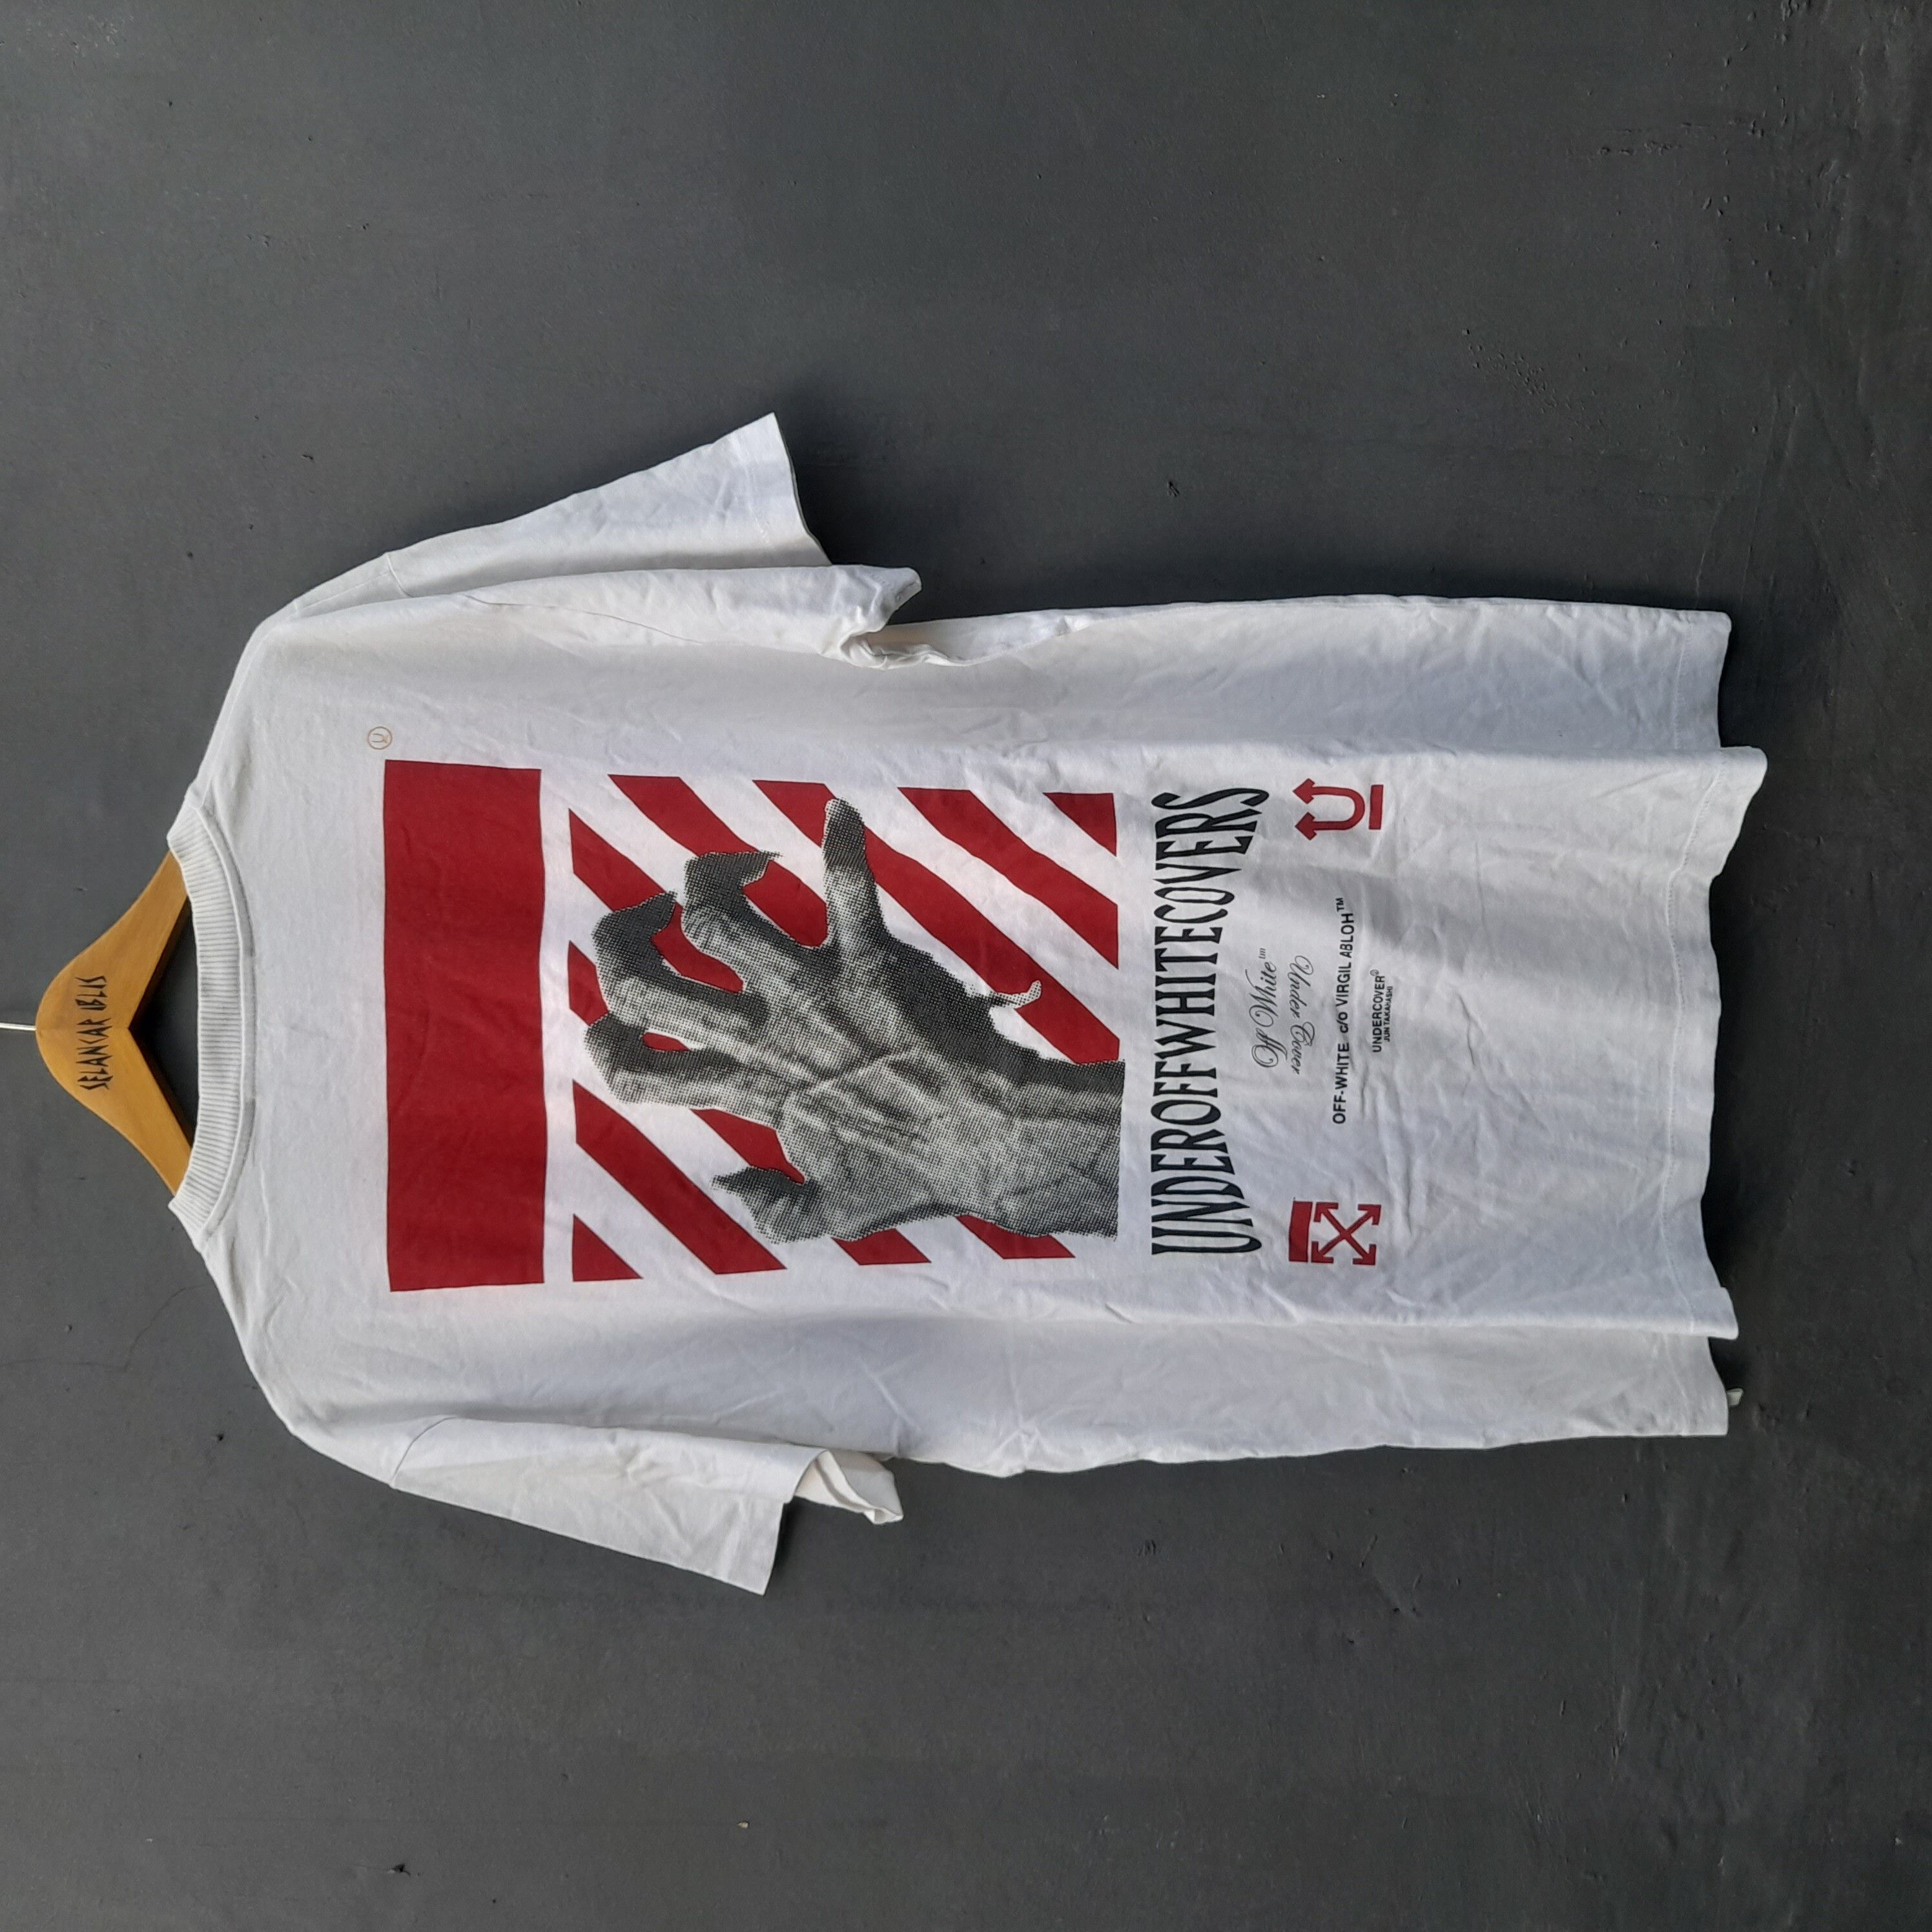 Undercover Off white x undercover Hand dart t shirt | Grailed